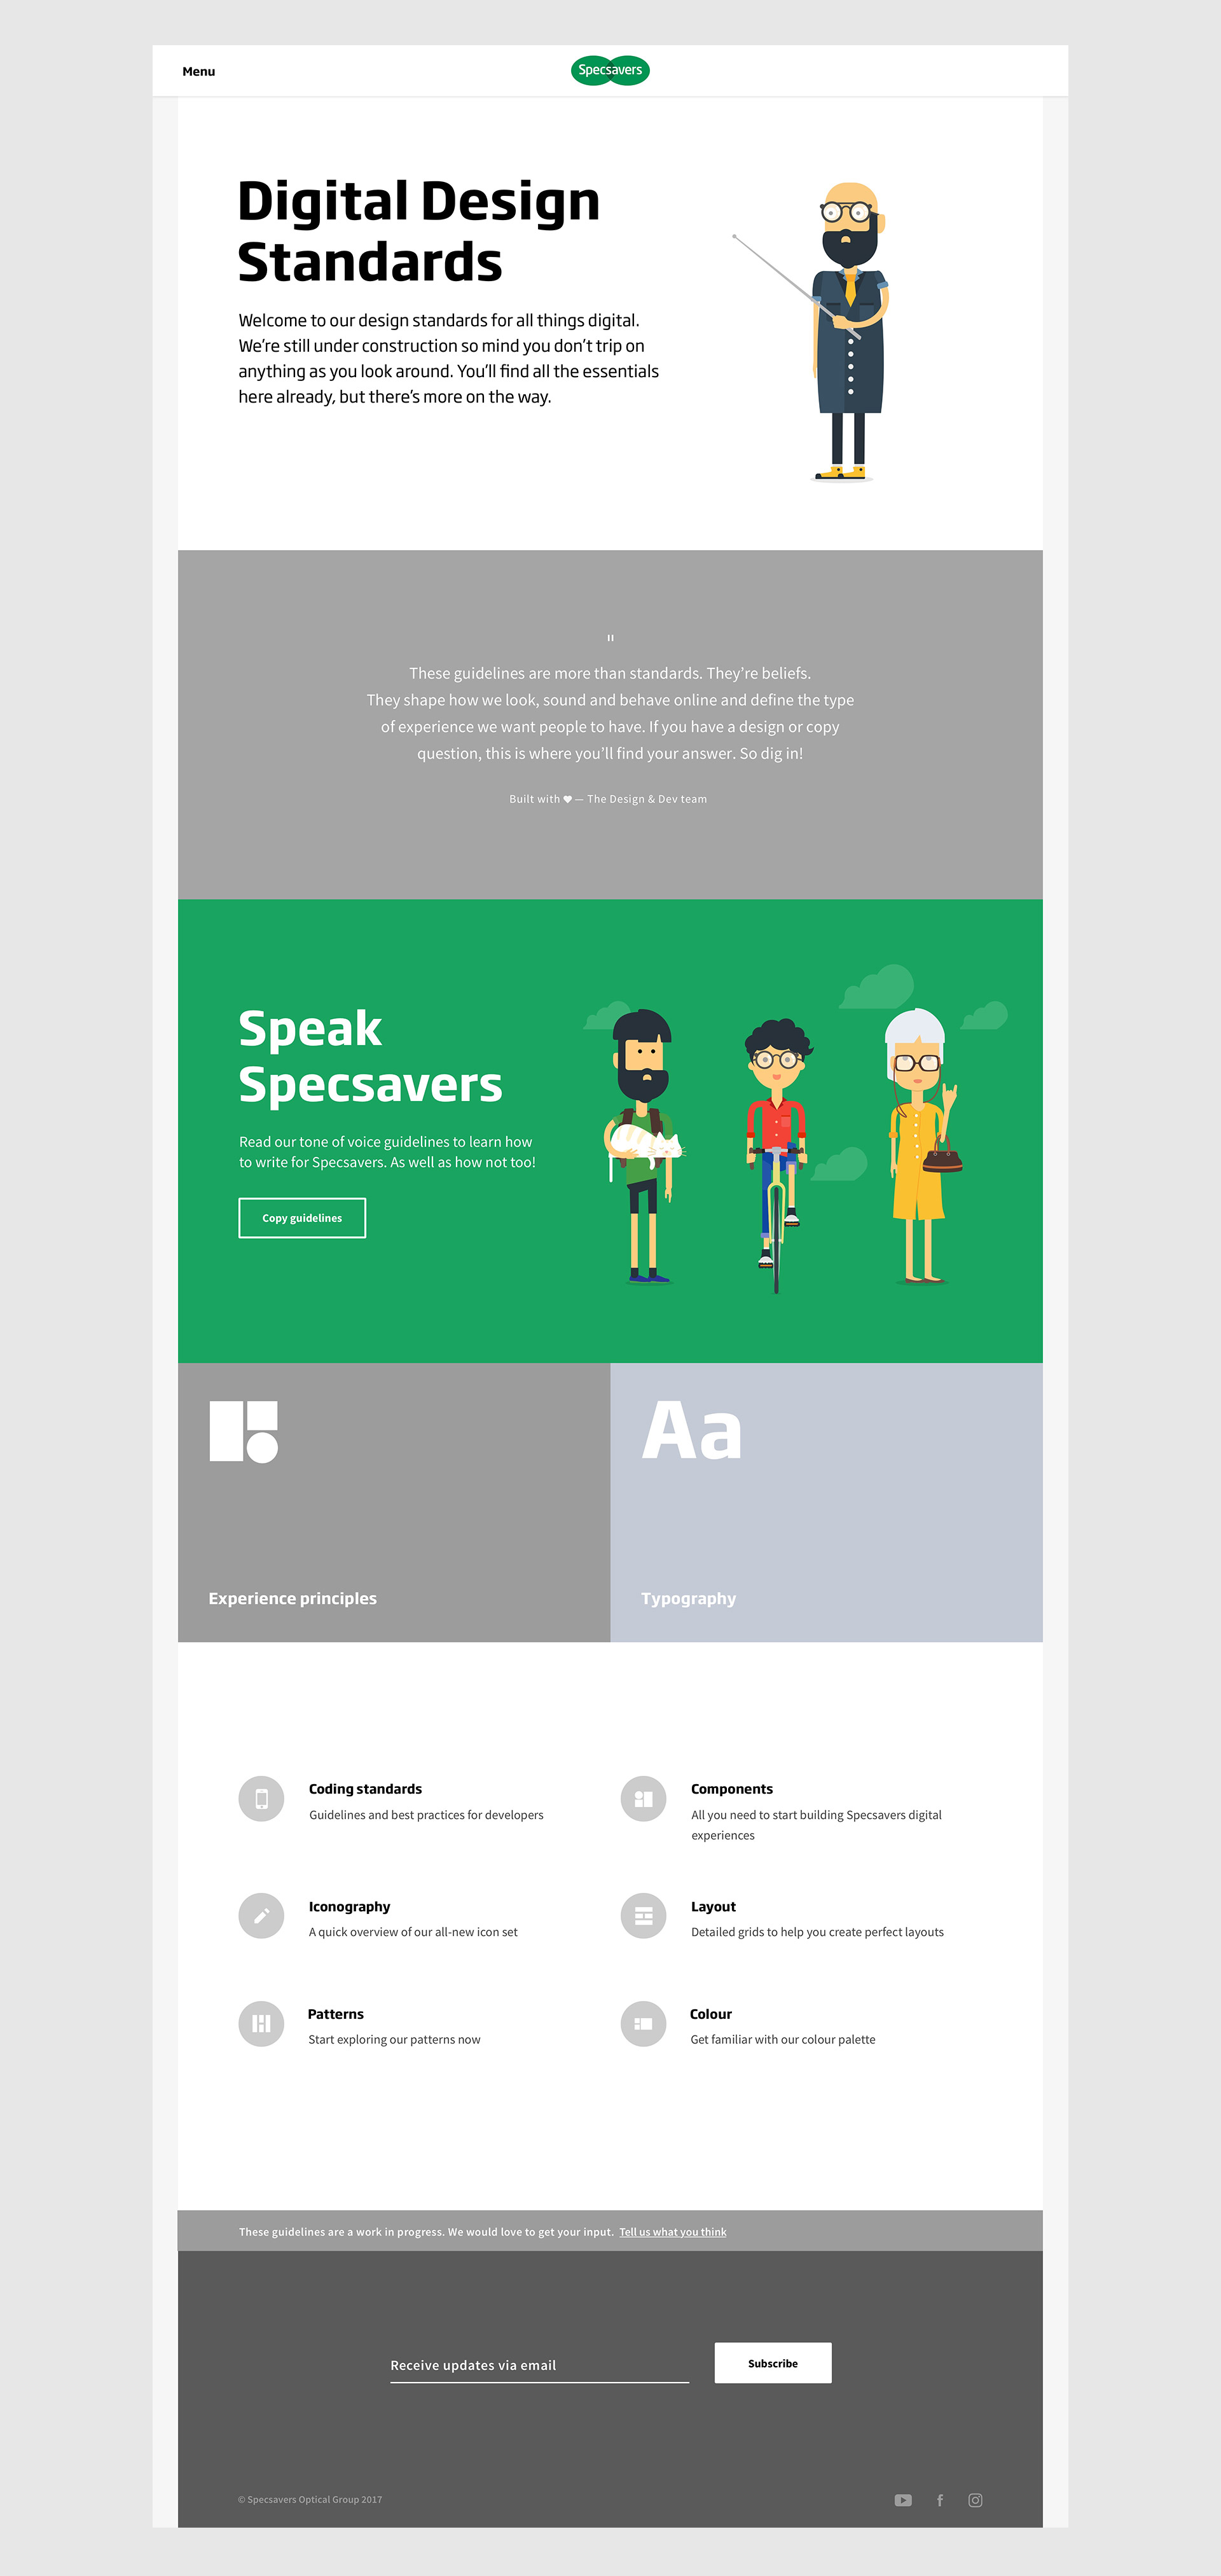 Specsavers-08-a-large